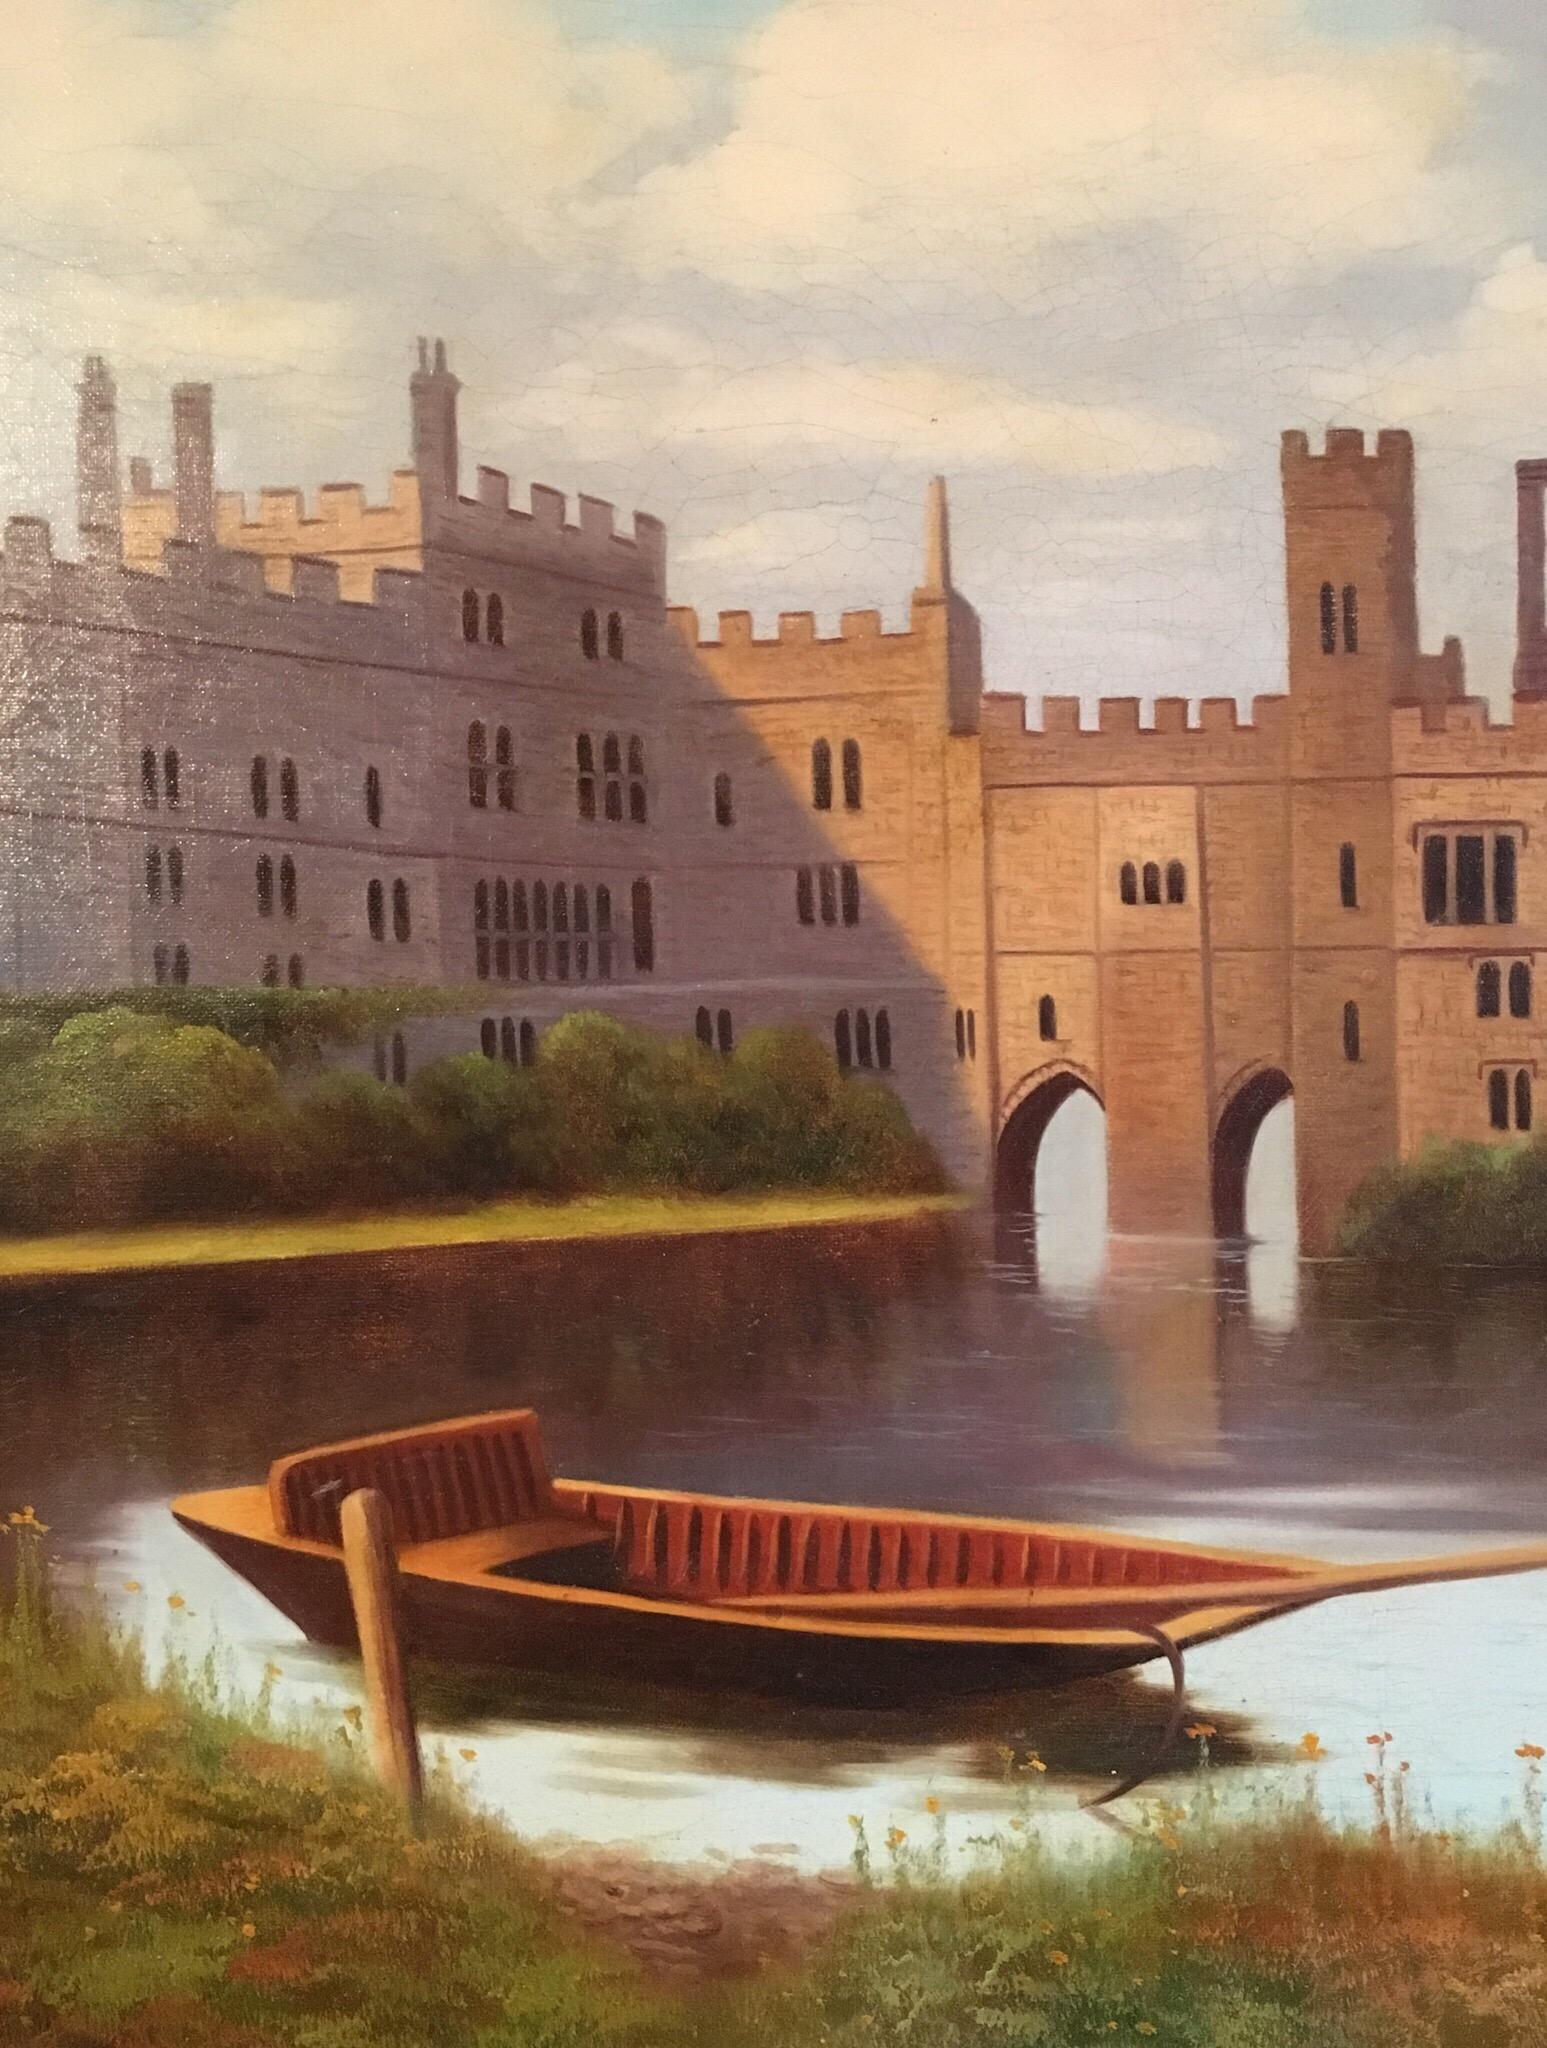 Leeds Castle, Kent
By British artist, early 20th Century
The artist has signed the painting indistinctly on the lower right hand corner
Oil painting on canvas, framed
Frame size: 26.5 x 36.5 inches

Wonderful landscape oil painting of Leeds Castle